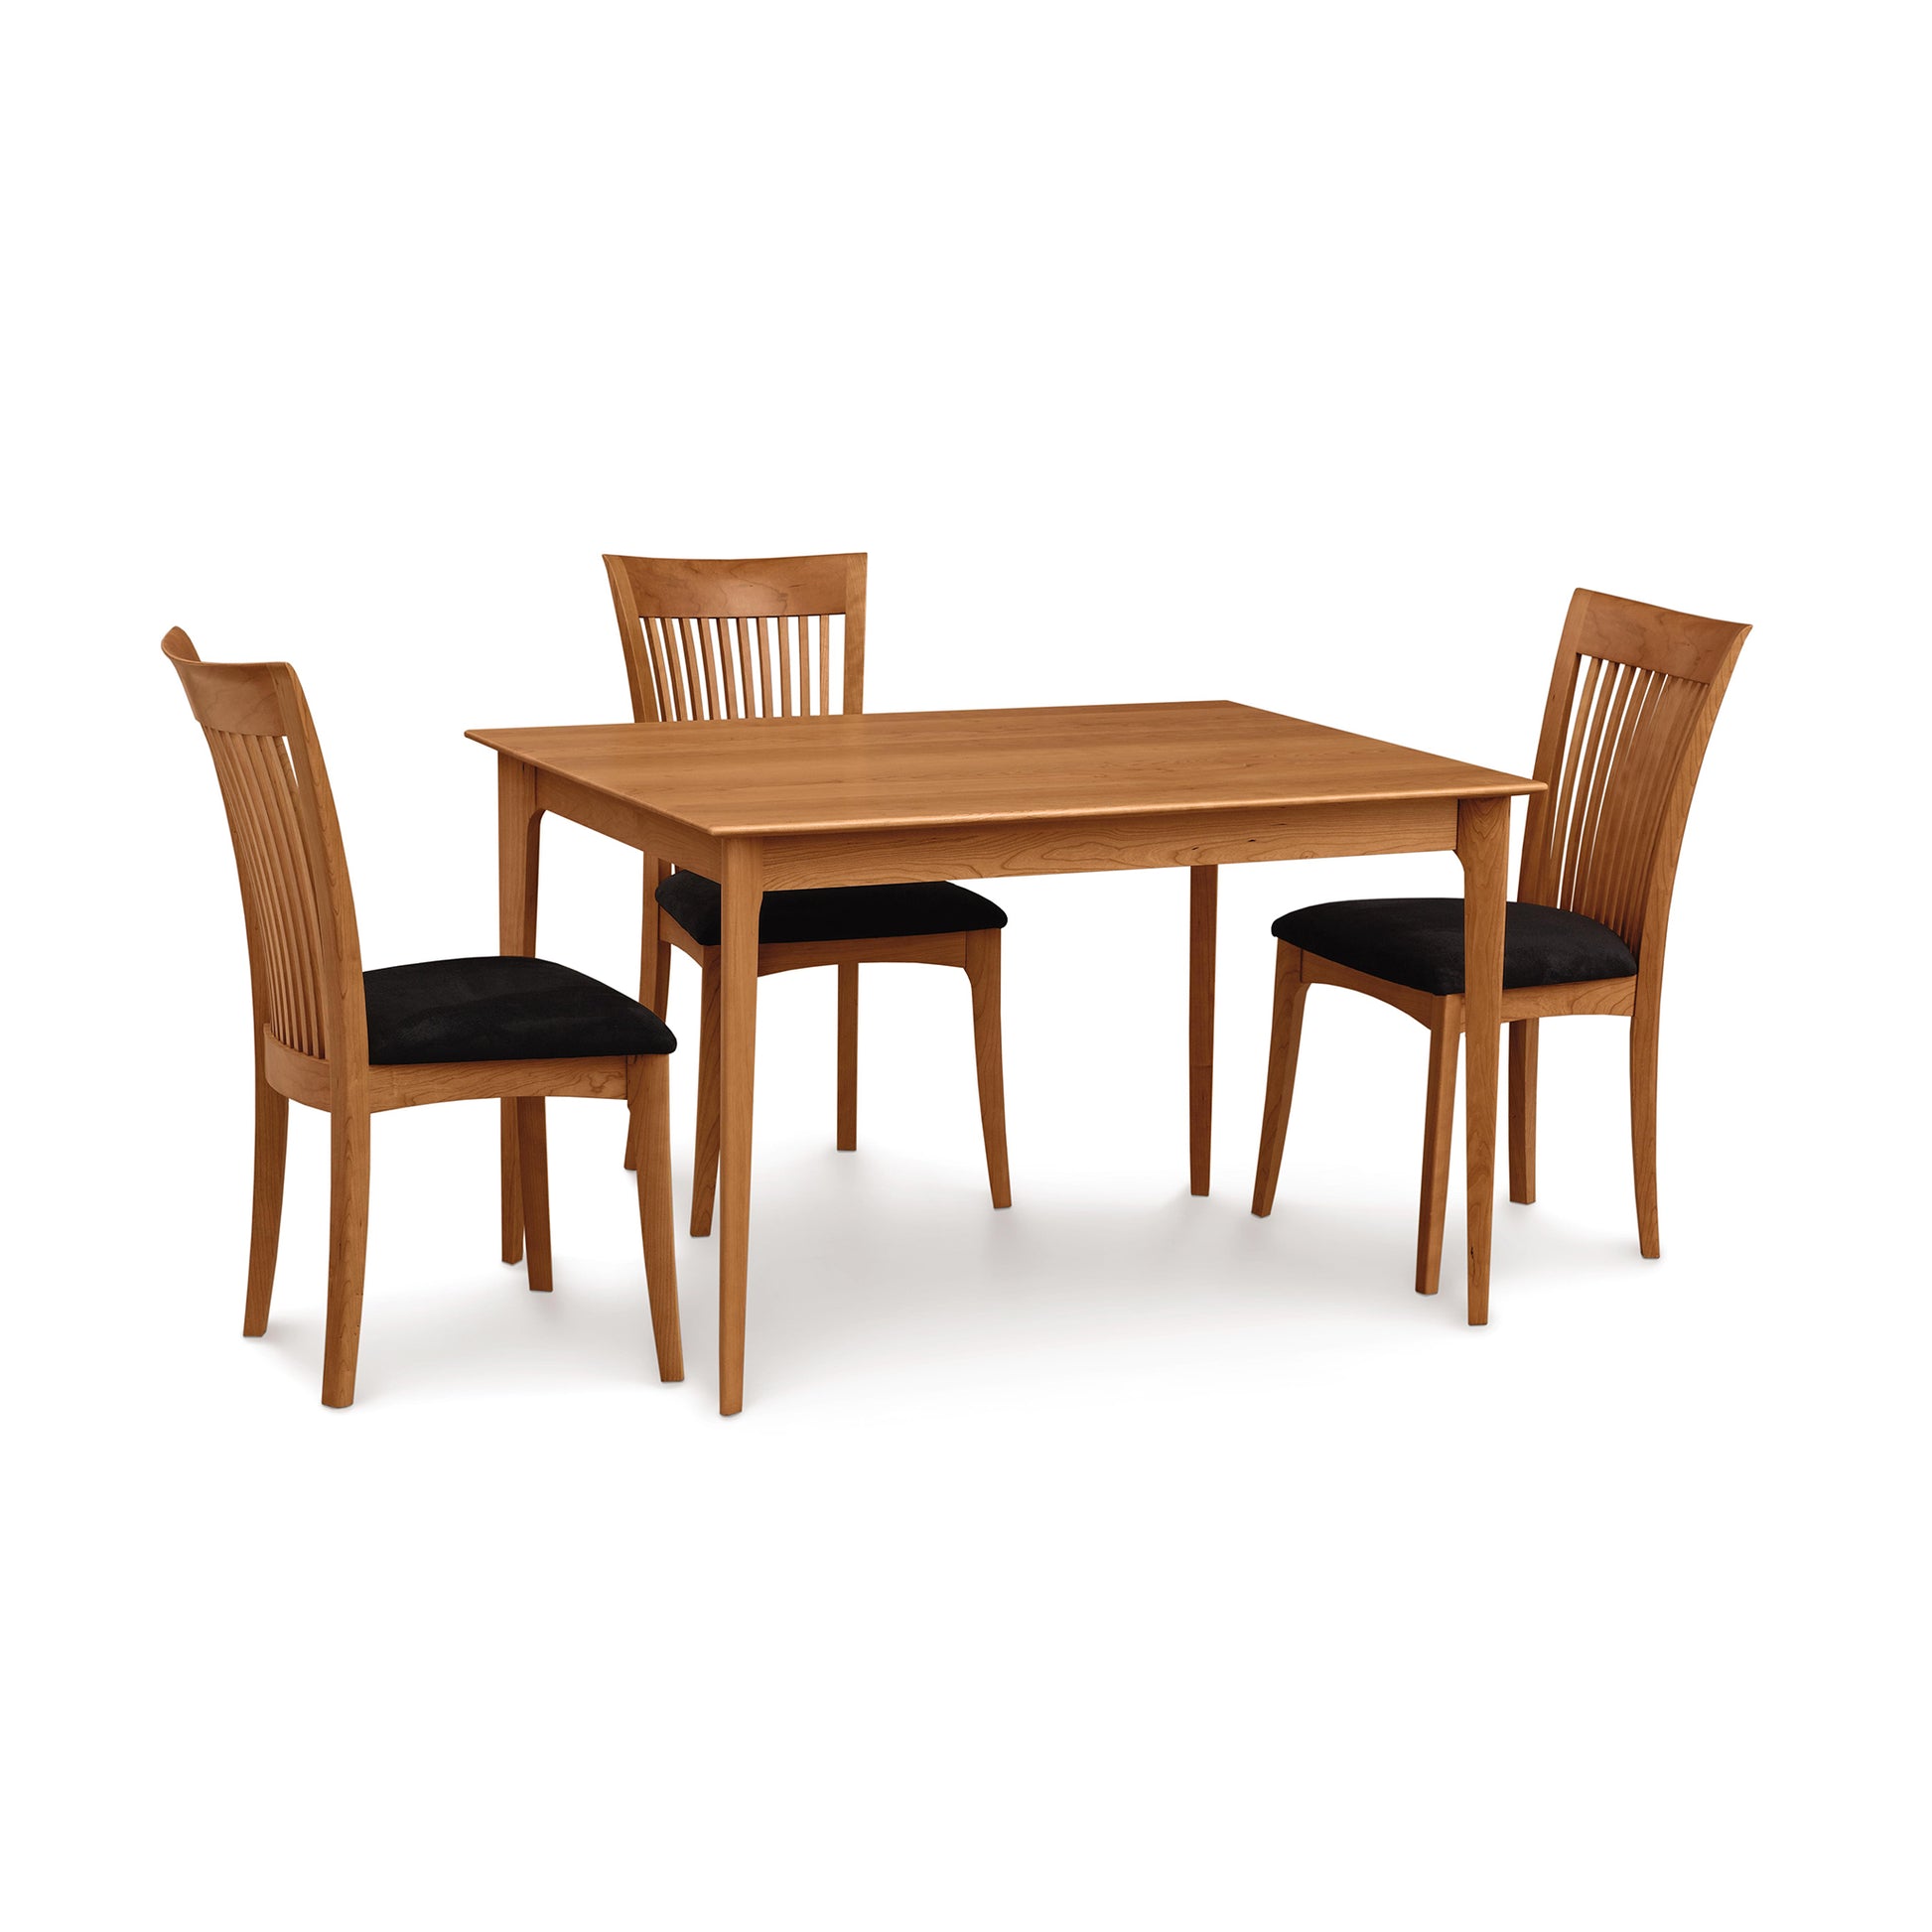 A Copeland Furniture Sarah Shaker Tapered Leg Solid Top Table with four matching chairs on a white background.